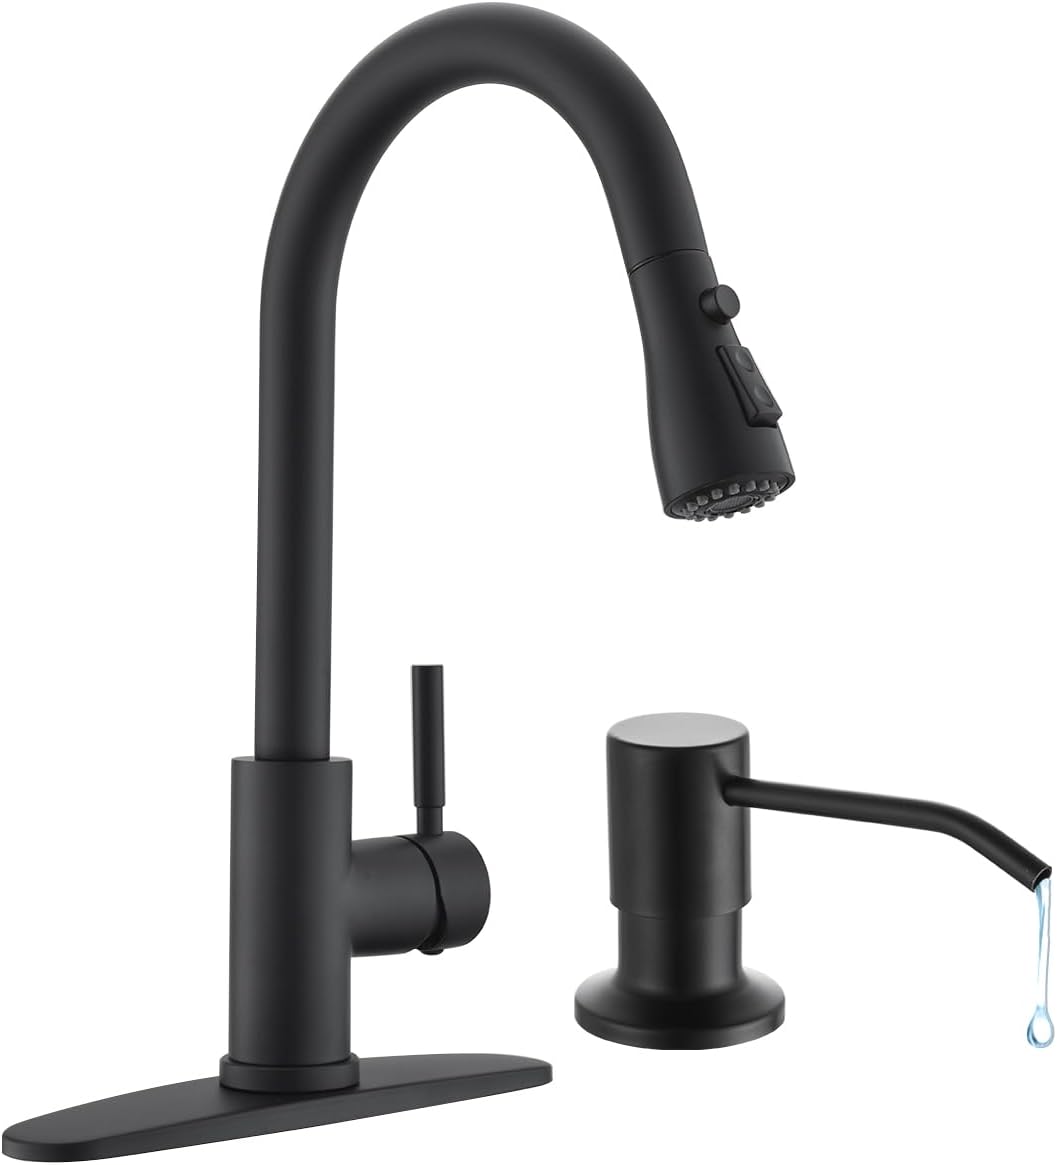 Arofa Kitchen Faucet with Soap Dispenser, Stainless Steel Kitchen Sink Faucet with Pull Down Sprayer 3 Mode Single Handle Gooseneck Pull Out Kitchen Faucet for 2/4 Hole, Matte Black